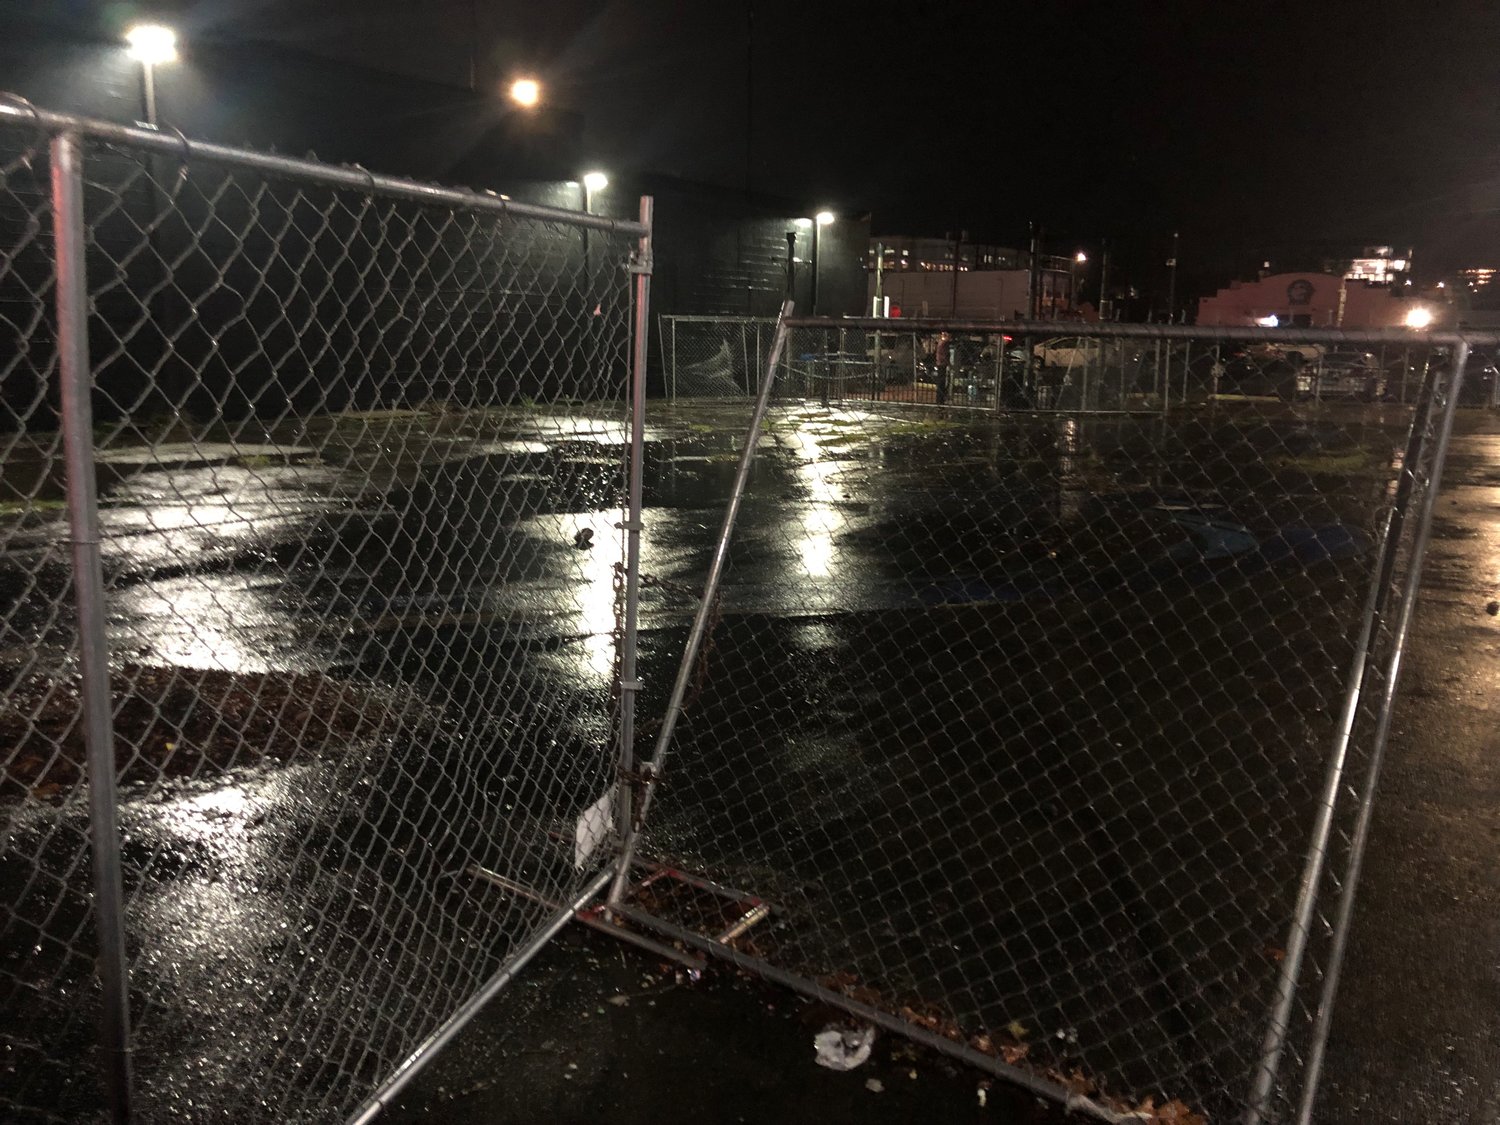 Like a scene from a New York police drama, Olympia's downtown concrete park is surrounded by chain-link fences that keep would-be users out most of the time.